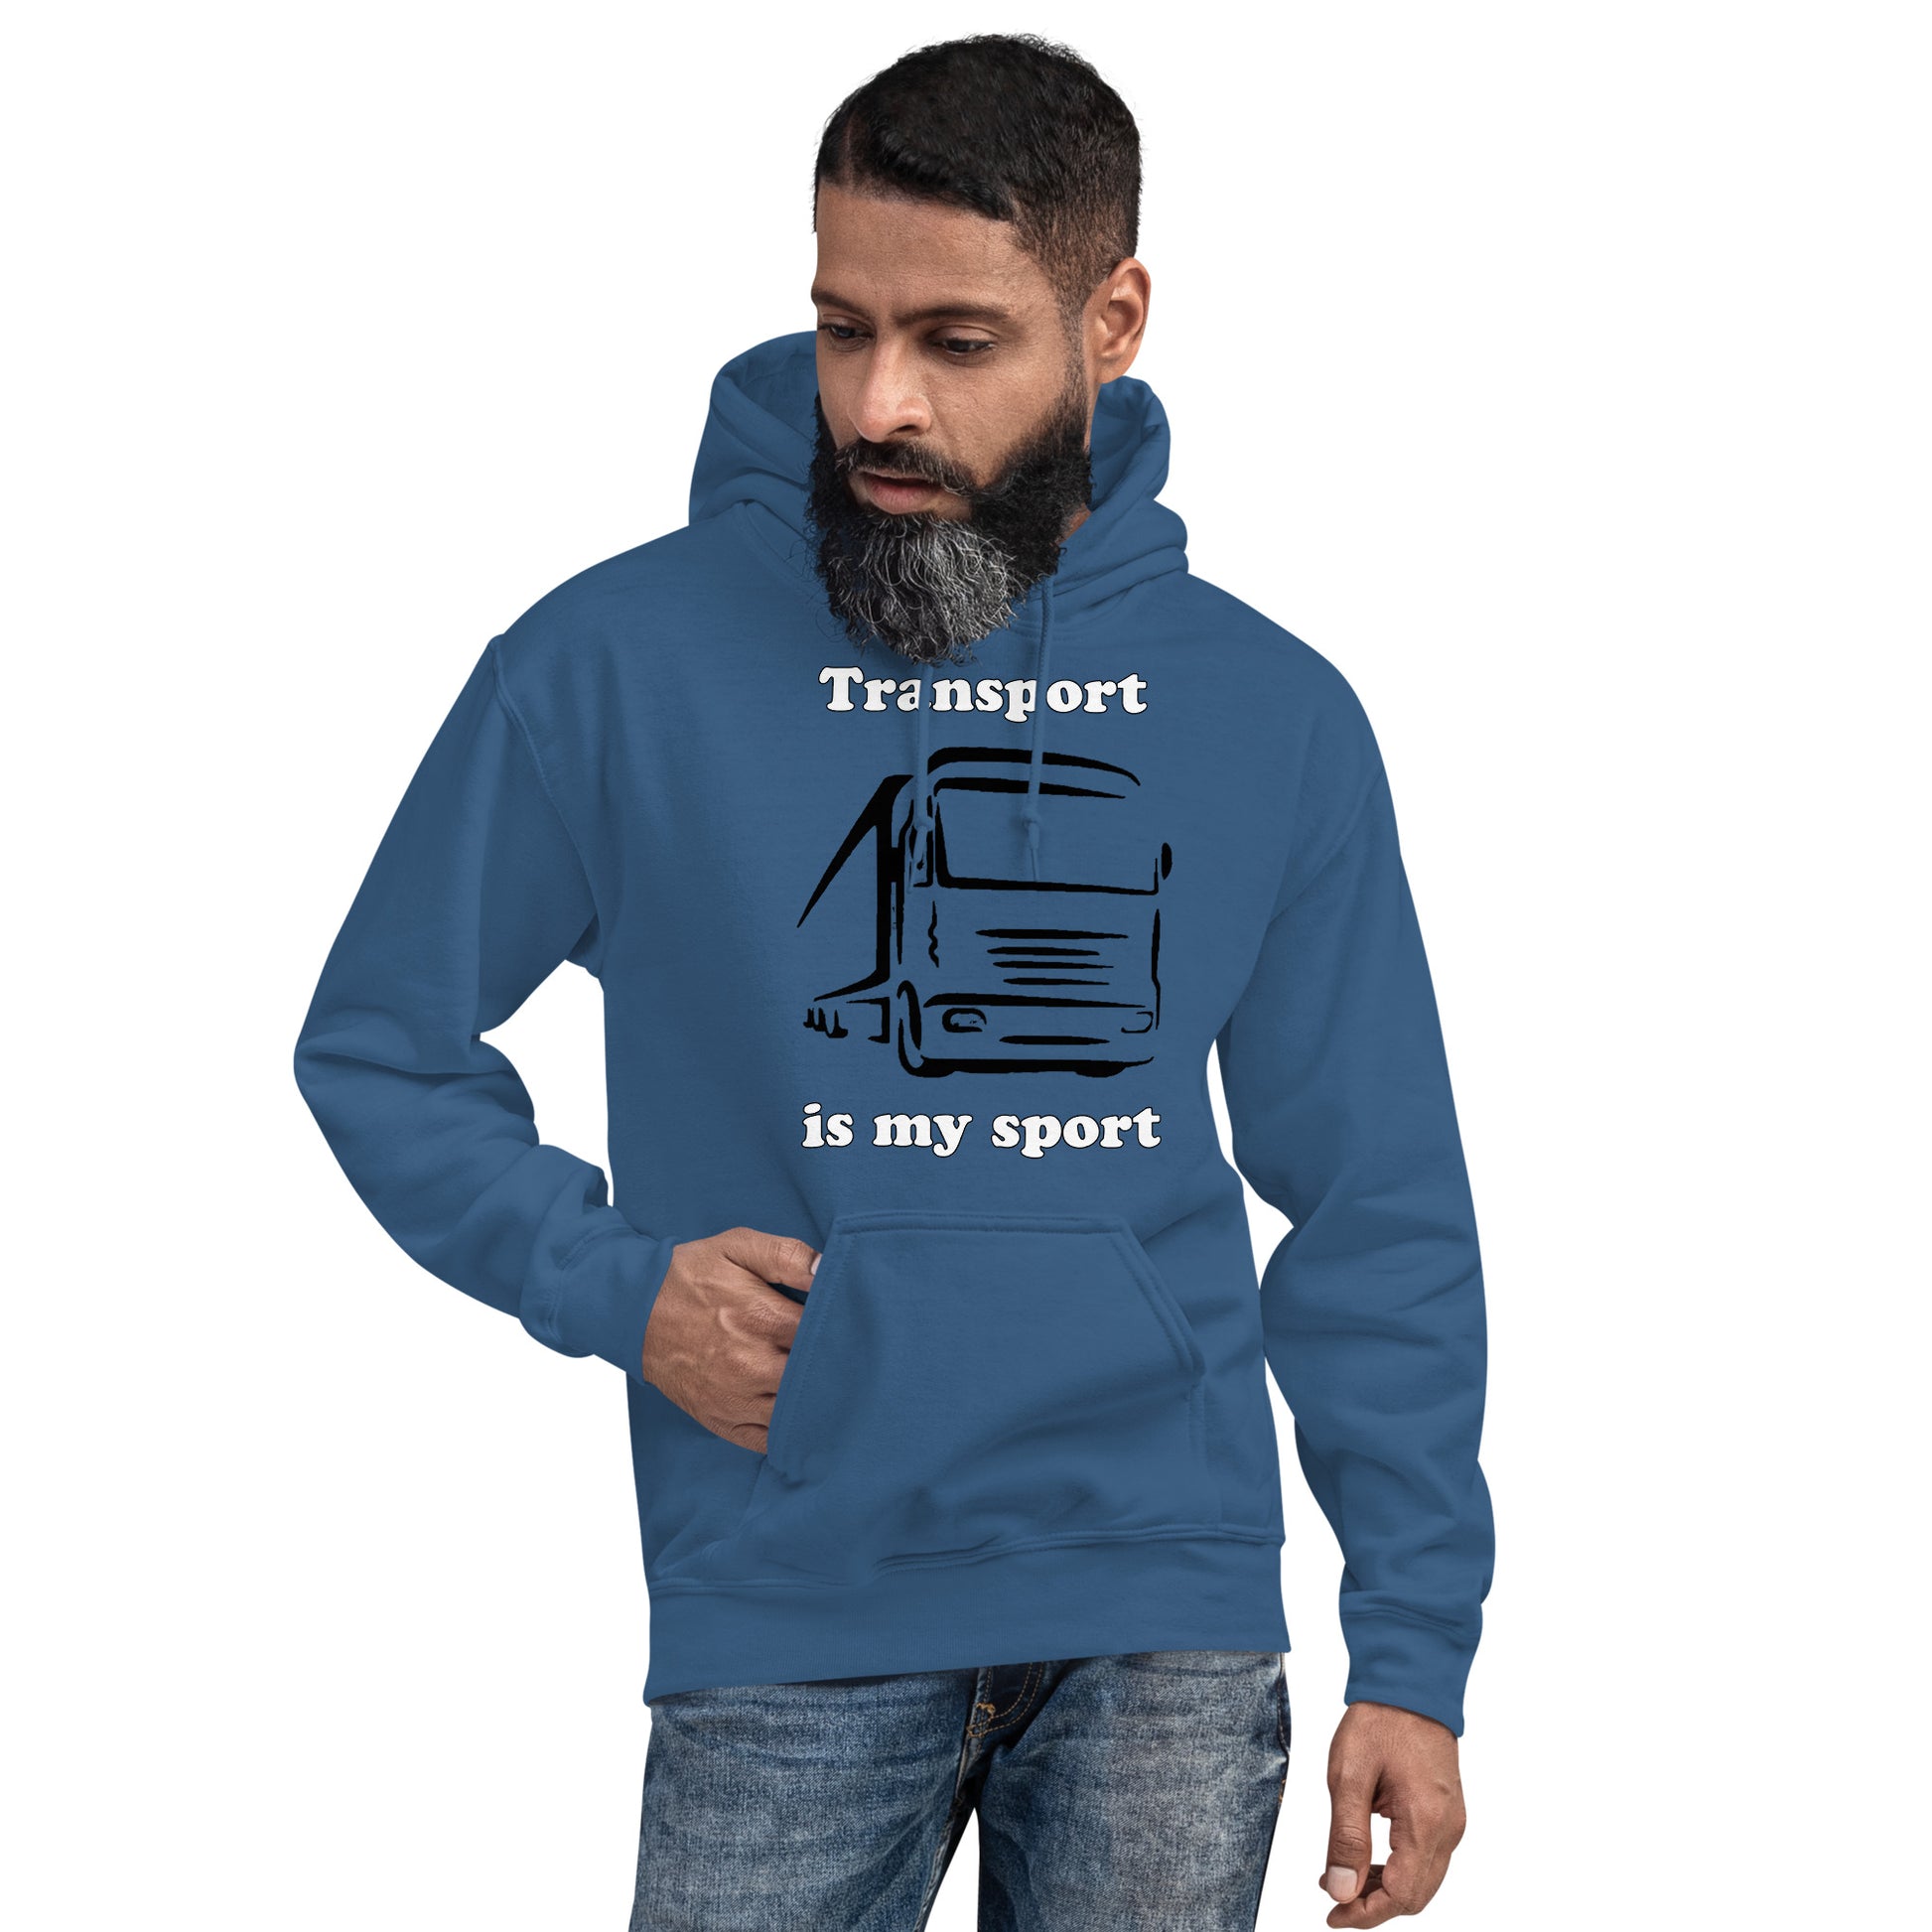 Man with indigo blue hoodie with picture of truck and text "Transport is my sport"